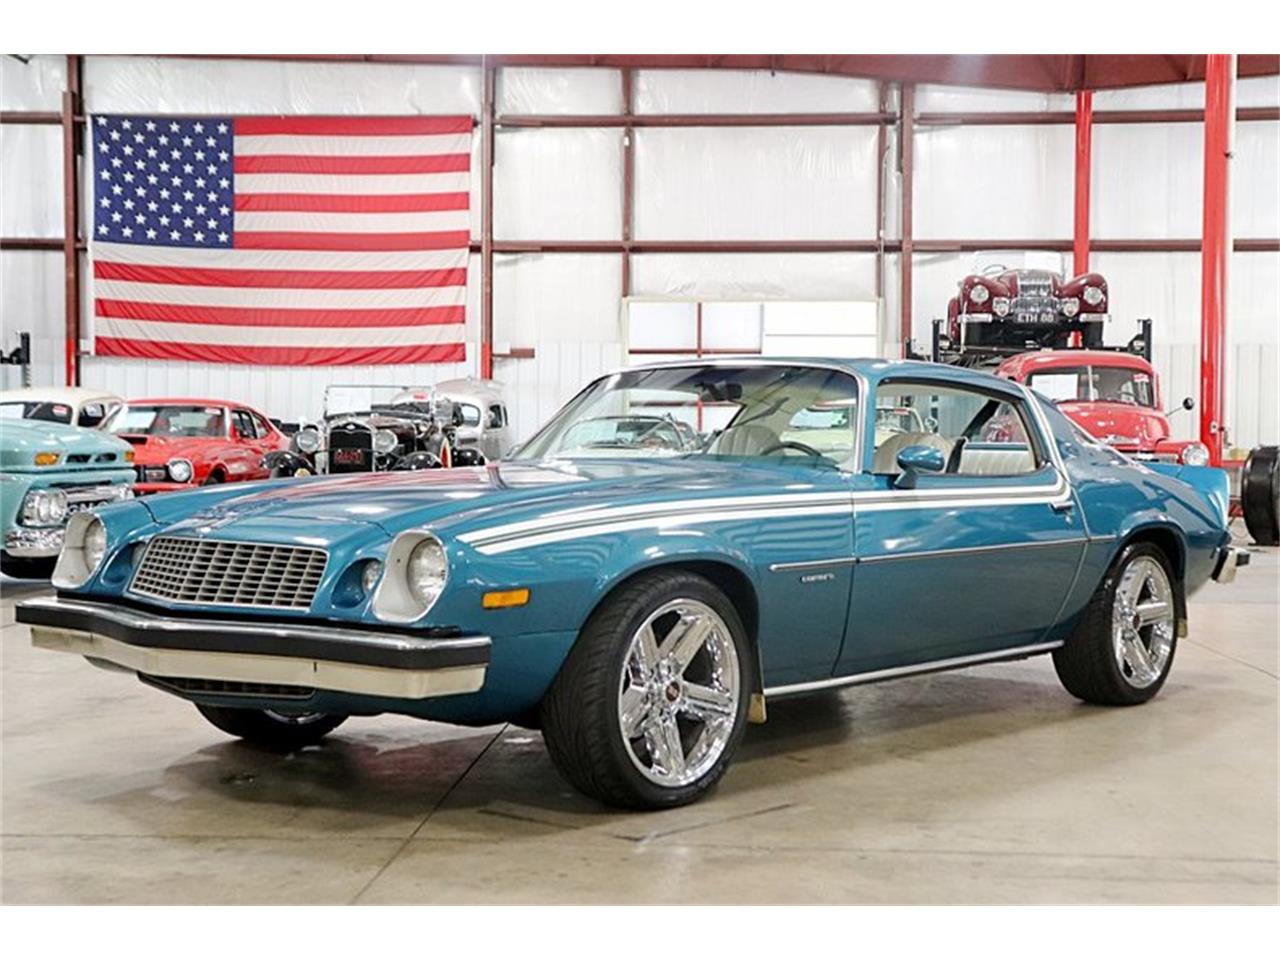 Teal Green Metallic 1977 Chevrolet Camaro for sale located in Kentwood, Mic...